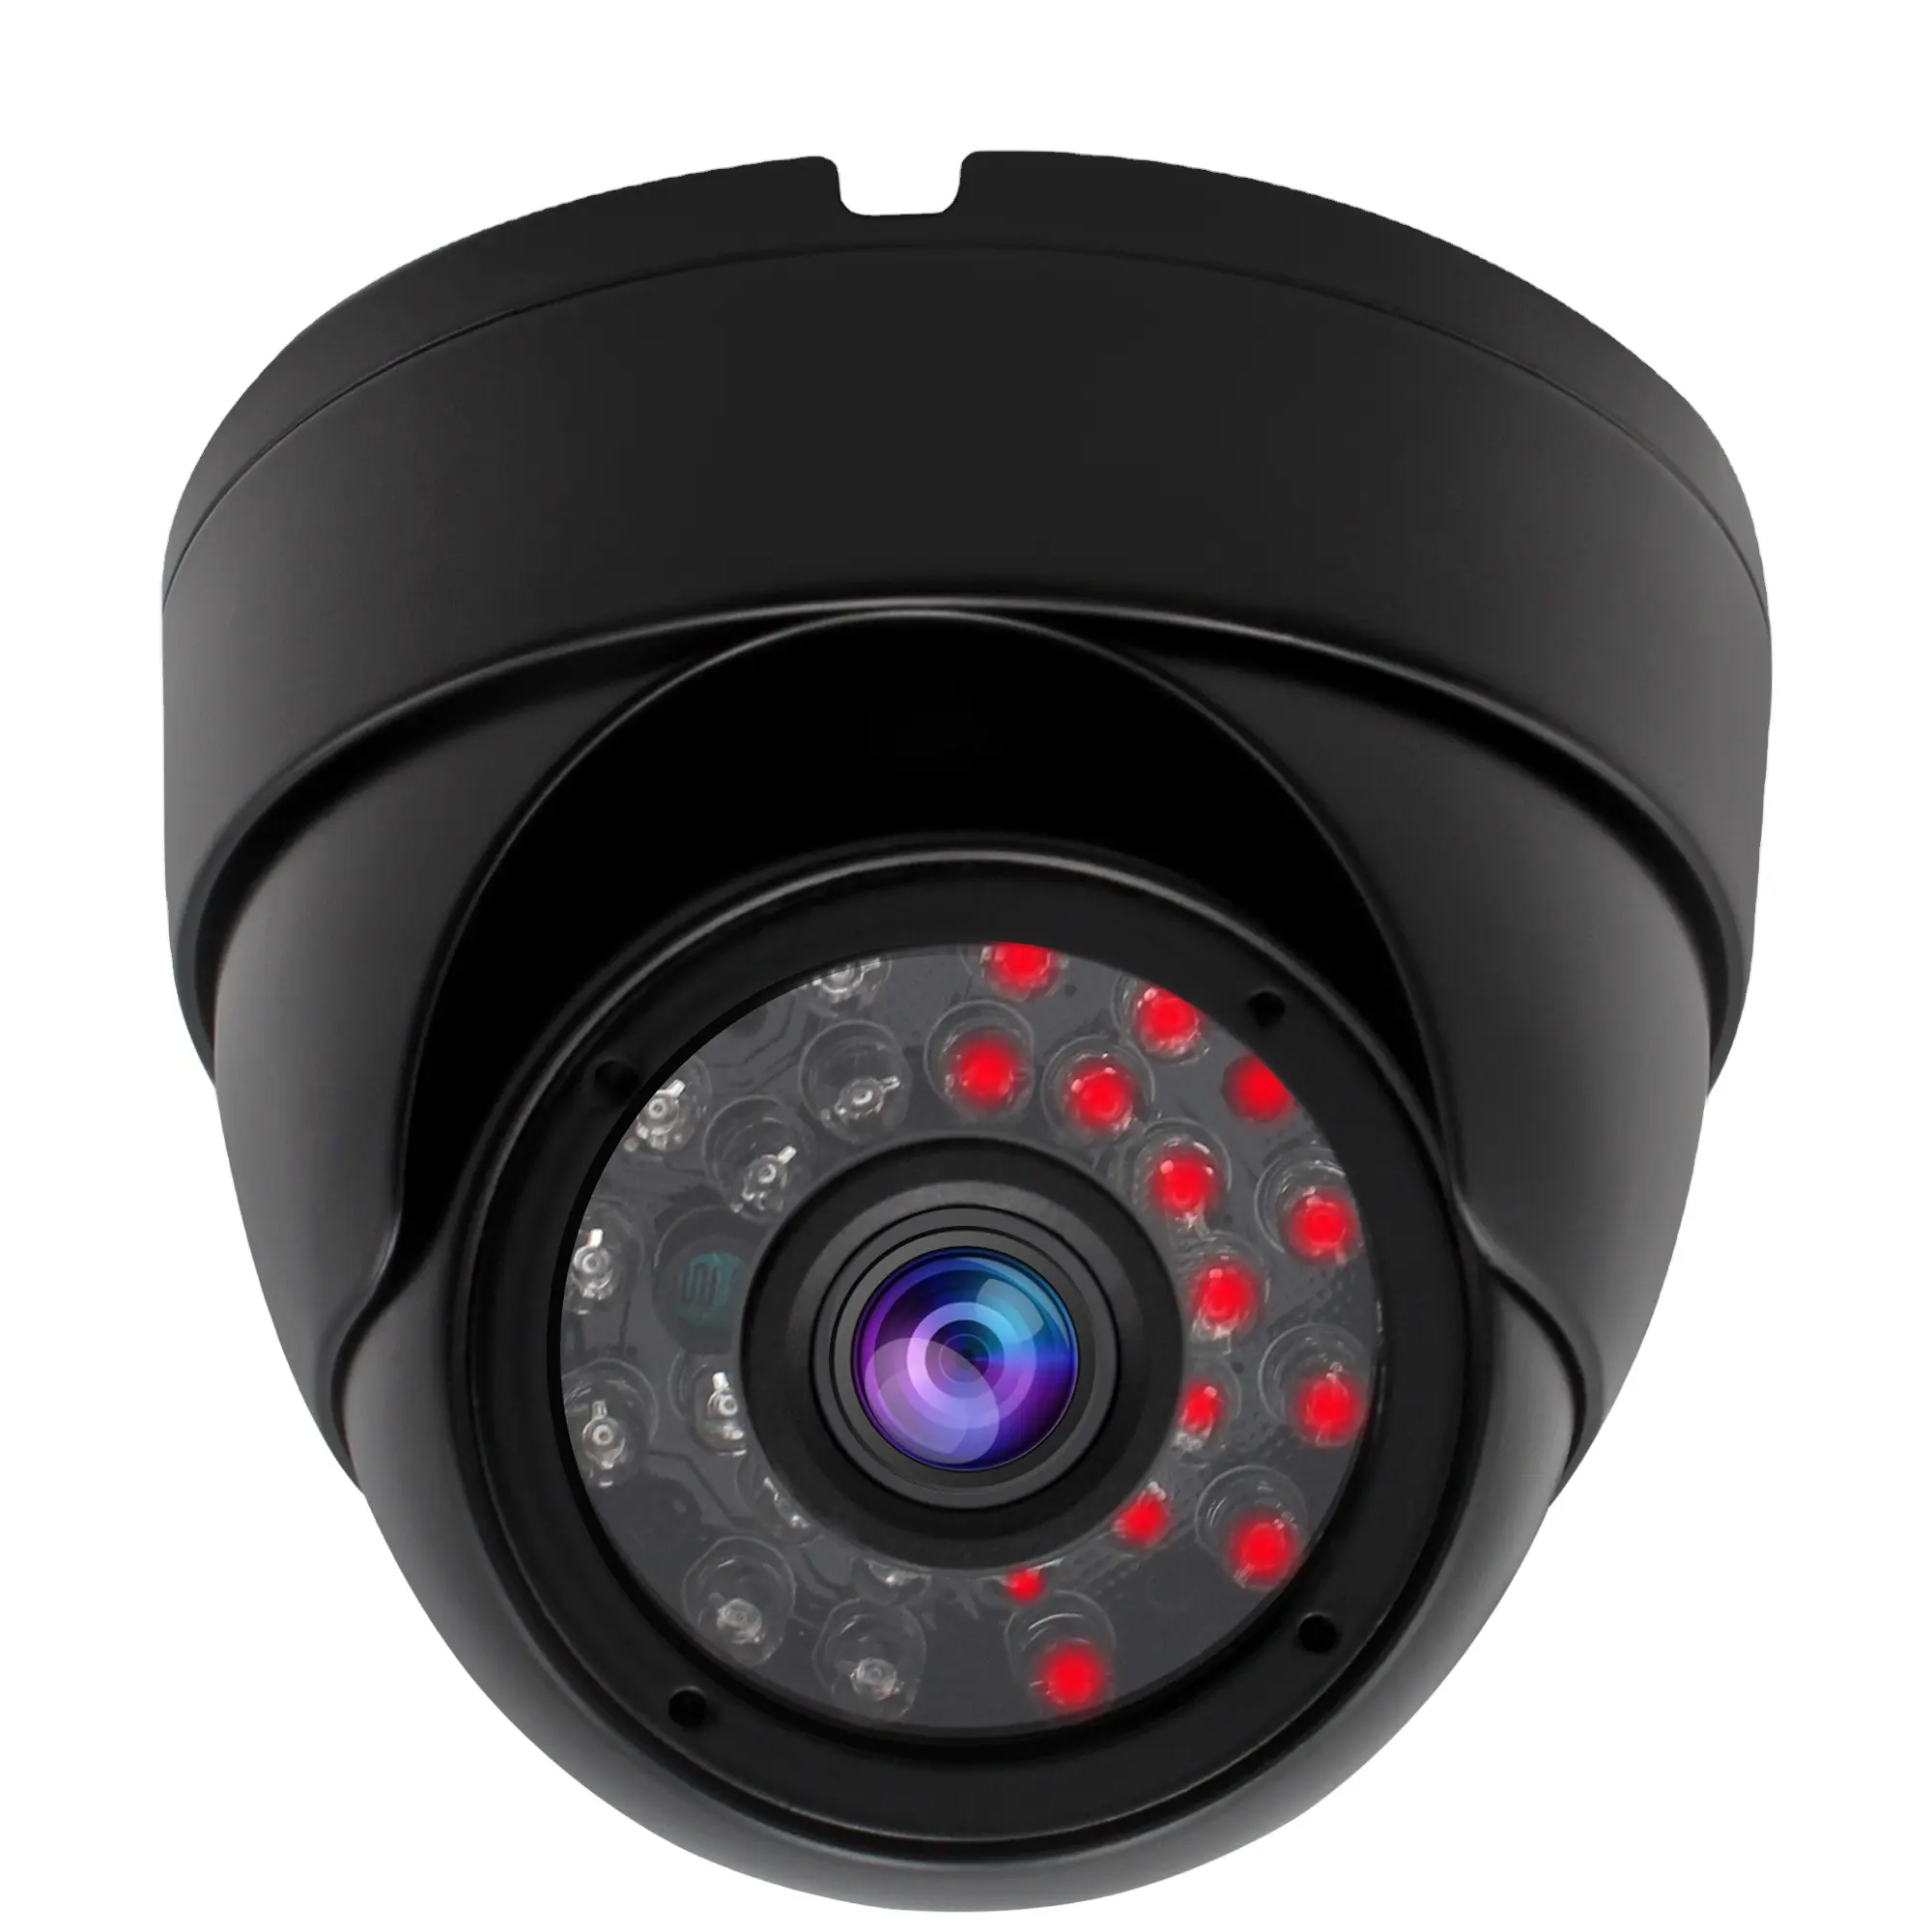 1080P Infrared Dome Webcam CMOS AR0330 H.264 USB Camera For Day And Night Video Surveillance